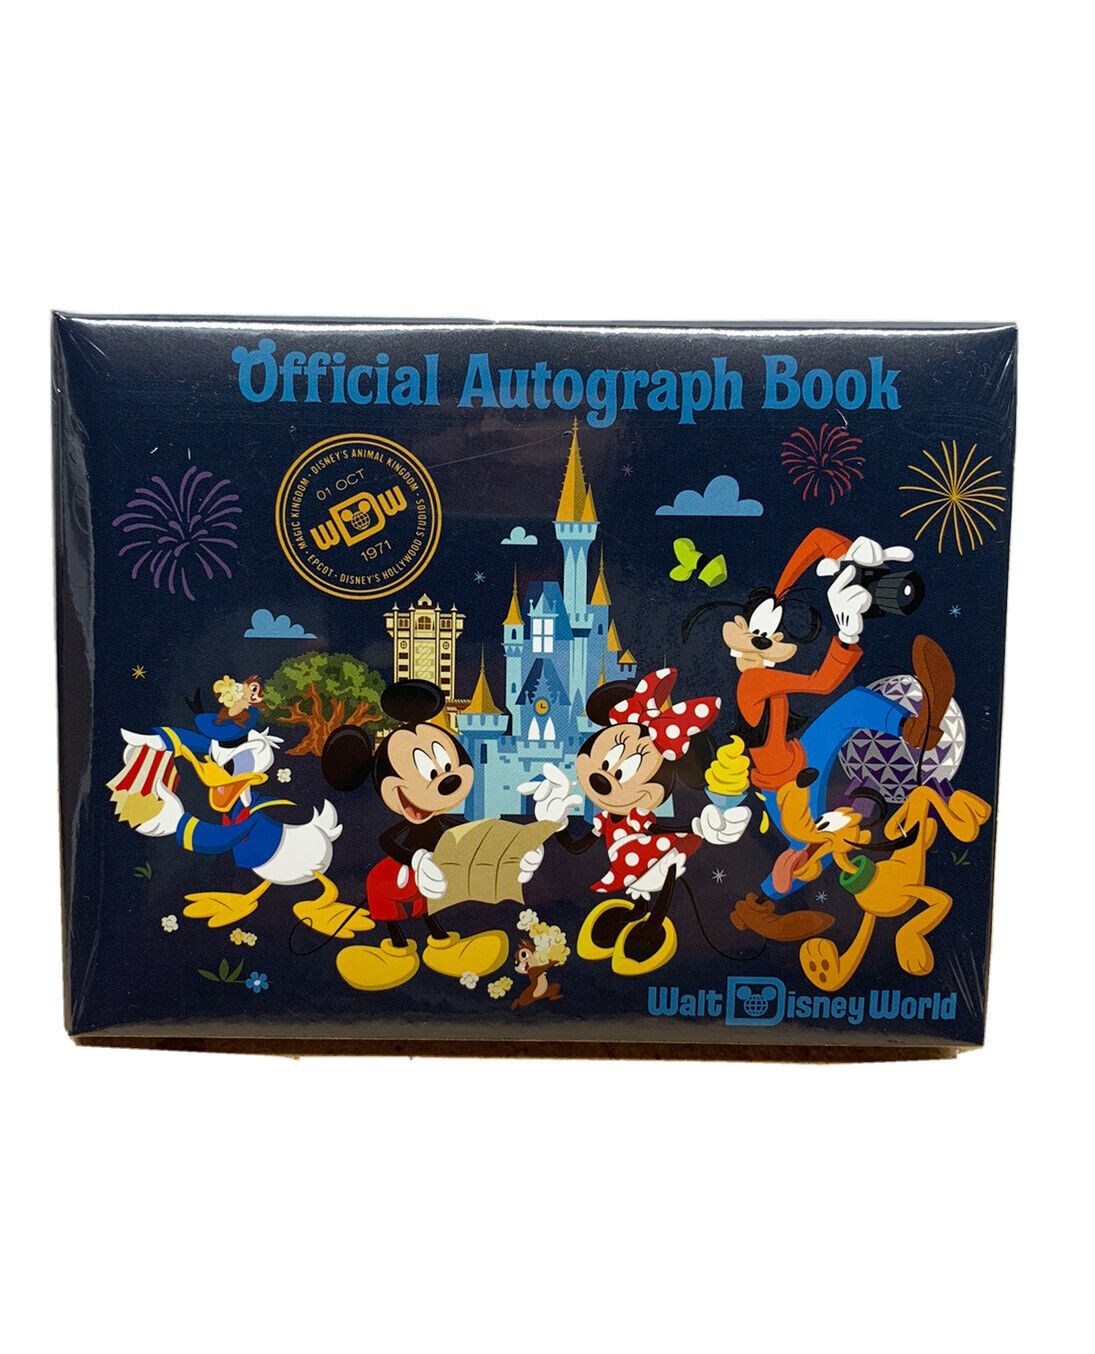 Walt Disney World Mickey Mouse & Friends Official Autograph Book Sealed New